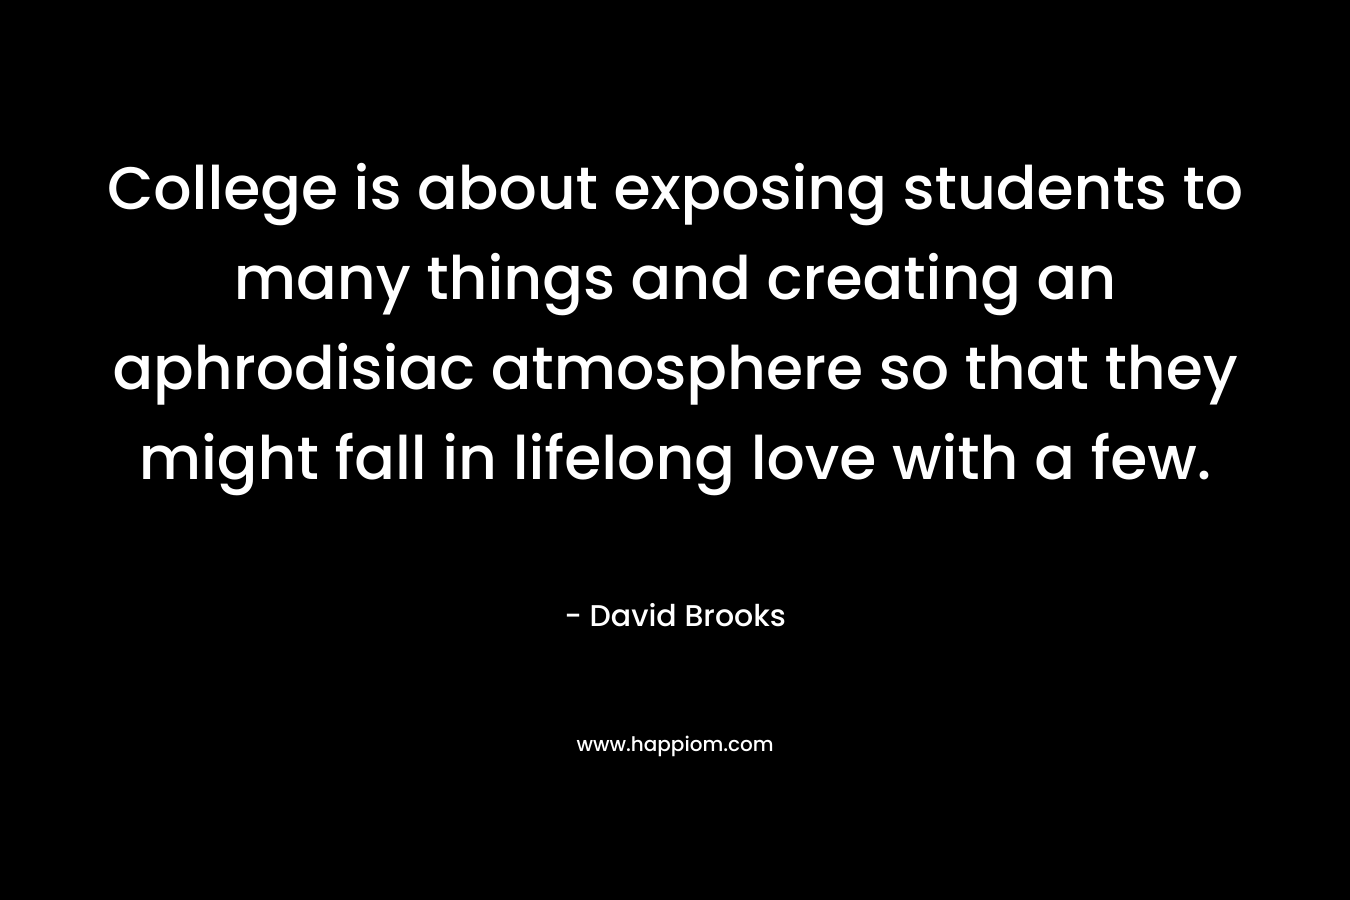 College is about exposing students to many things and creating an aphrodisiac atmosphere so that they might fall in lifelong love with a few. – David Brooks